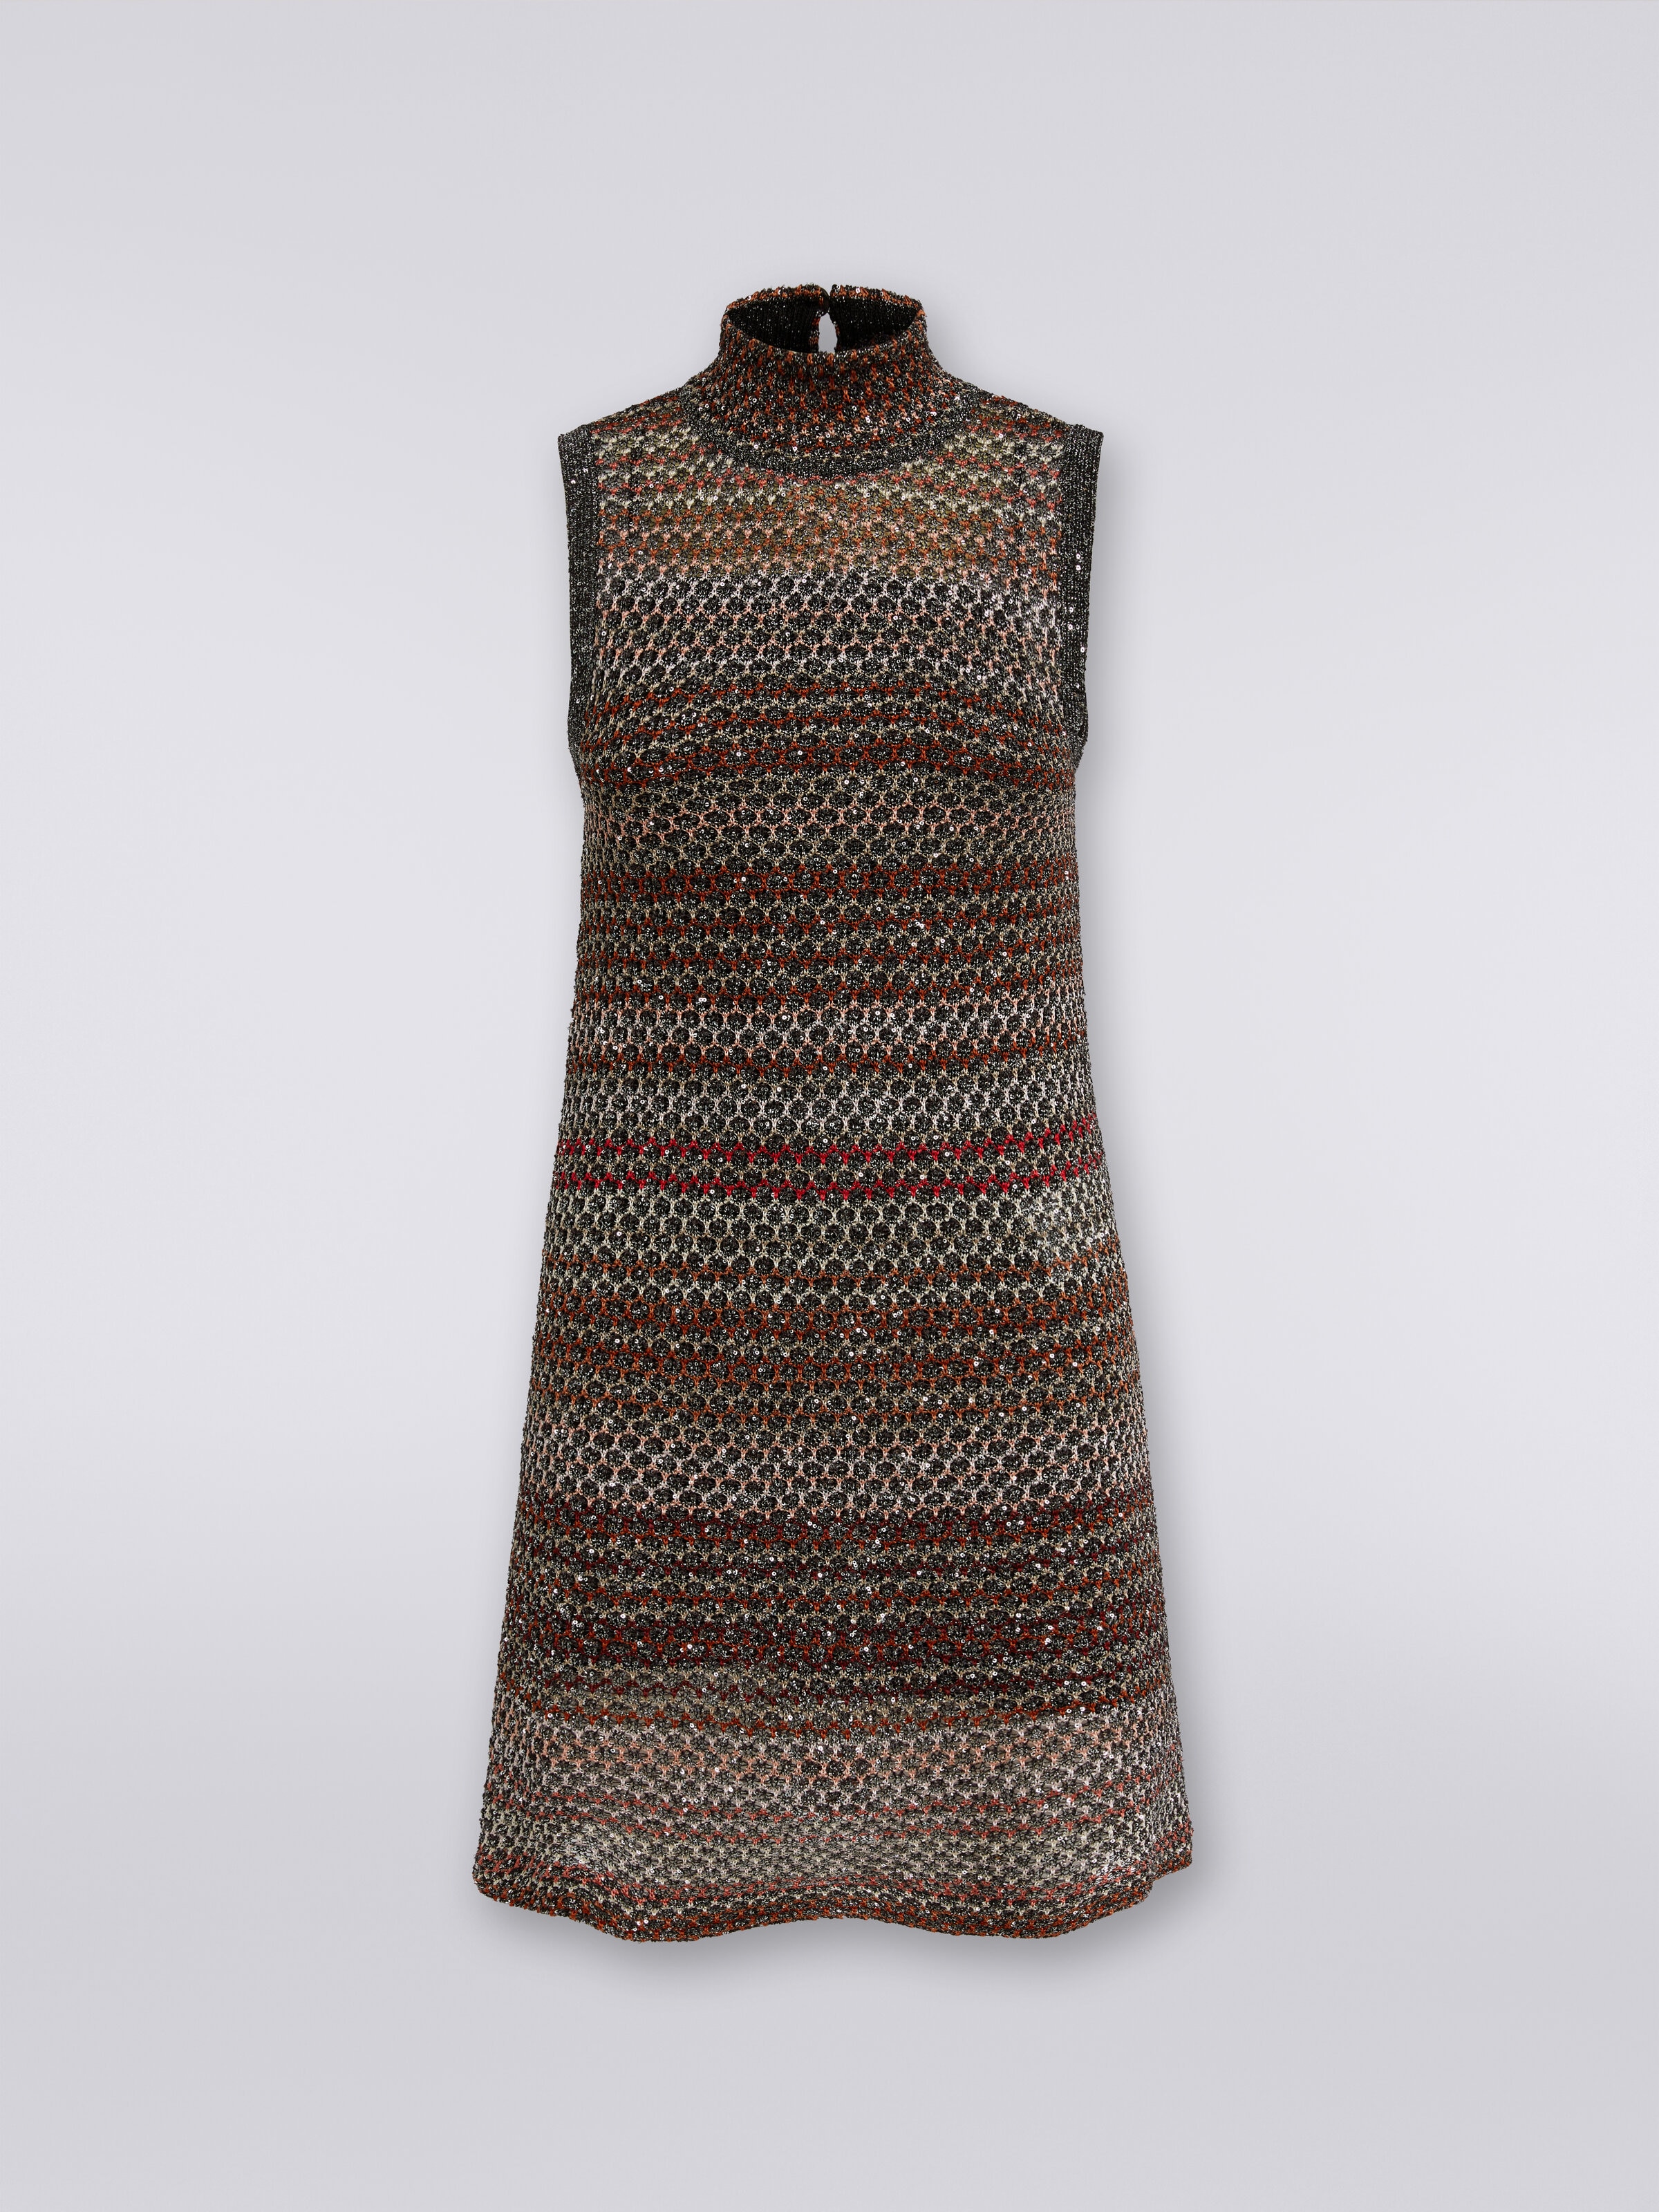 Minidress in mesh knit with high neck and sequin appliqué, Multicoloured  - 0